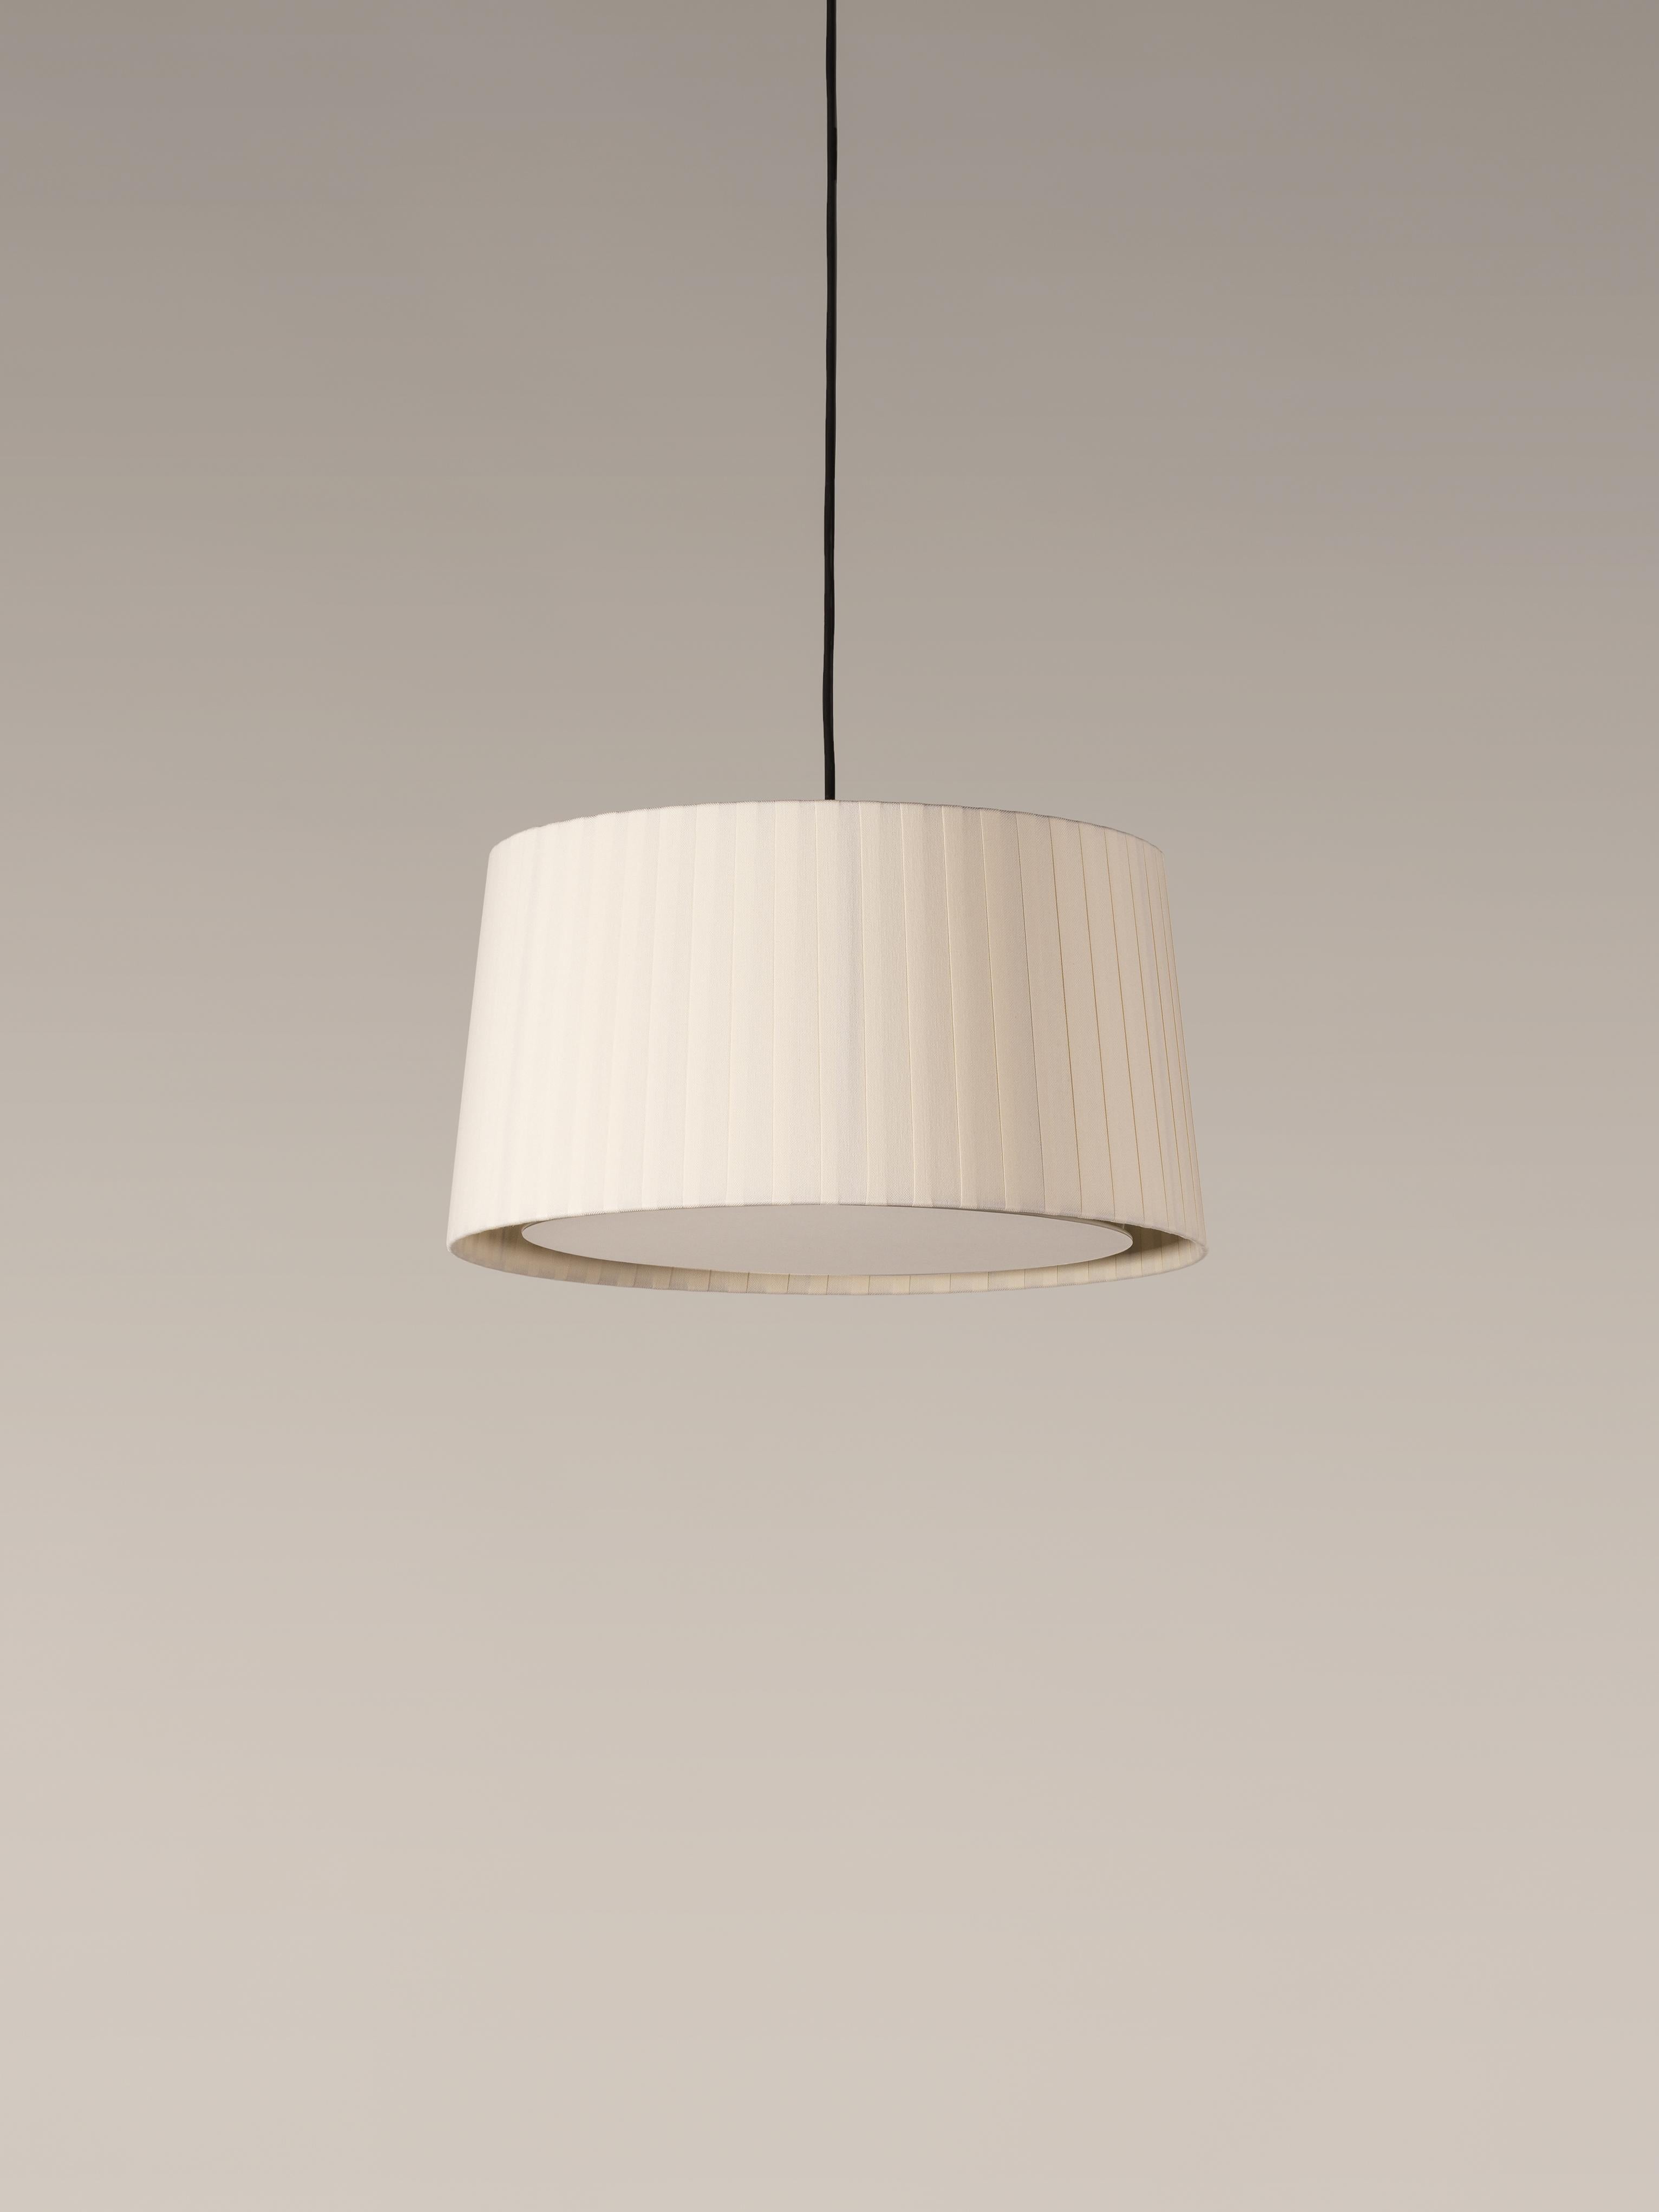 Natural GT6 pendant lamp by Santa & Cole
Dimensions: D 45 x H 23 cm.
Materials: Metal, ribbon.
Available in other colors. Available in 2 lights version.

Designed for intermediate volumes and household areas, GT5 and GT6 are hanging lamps with